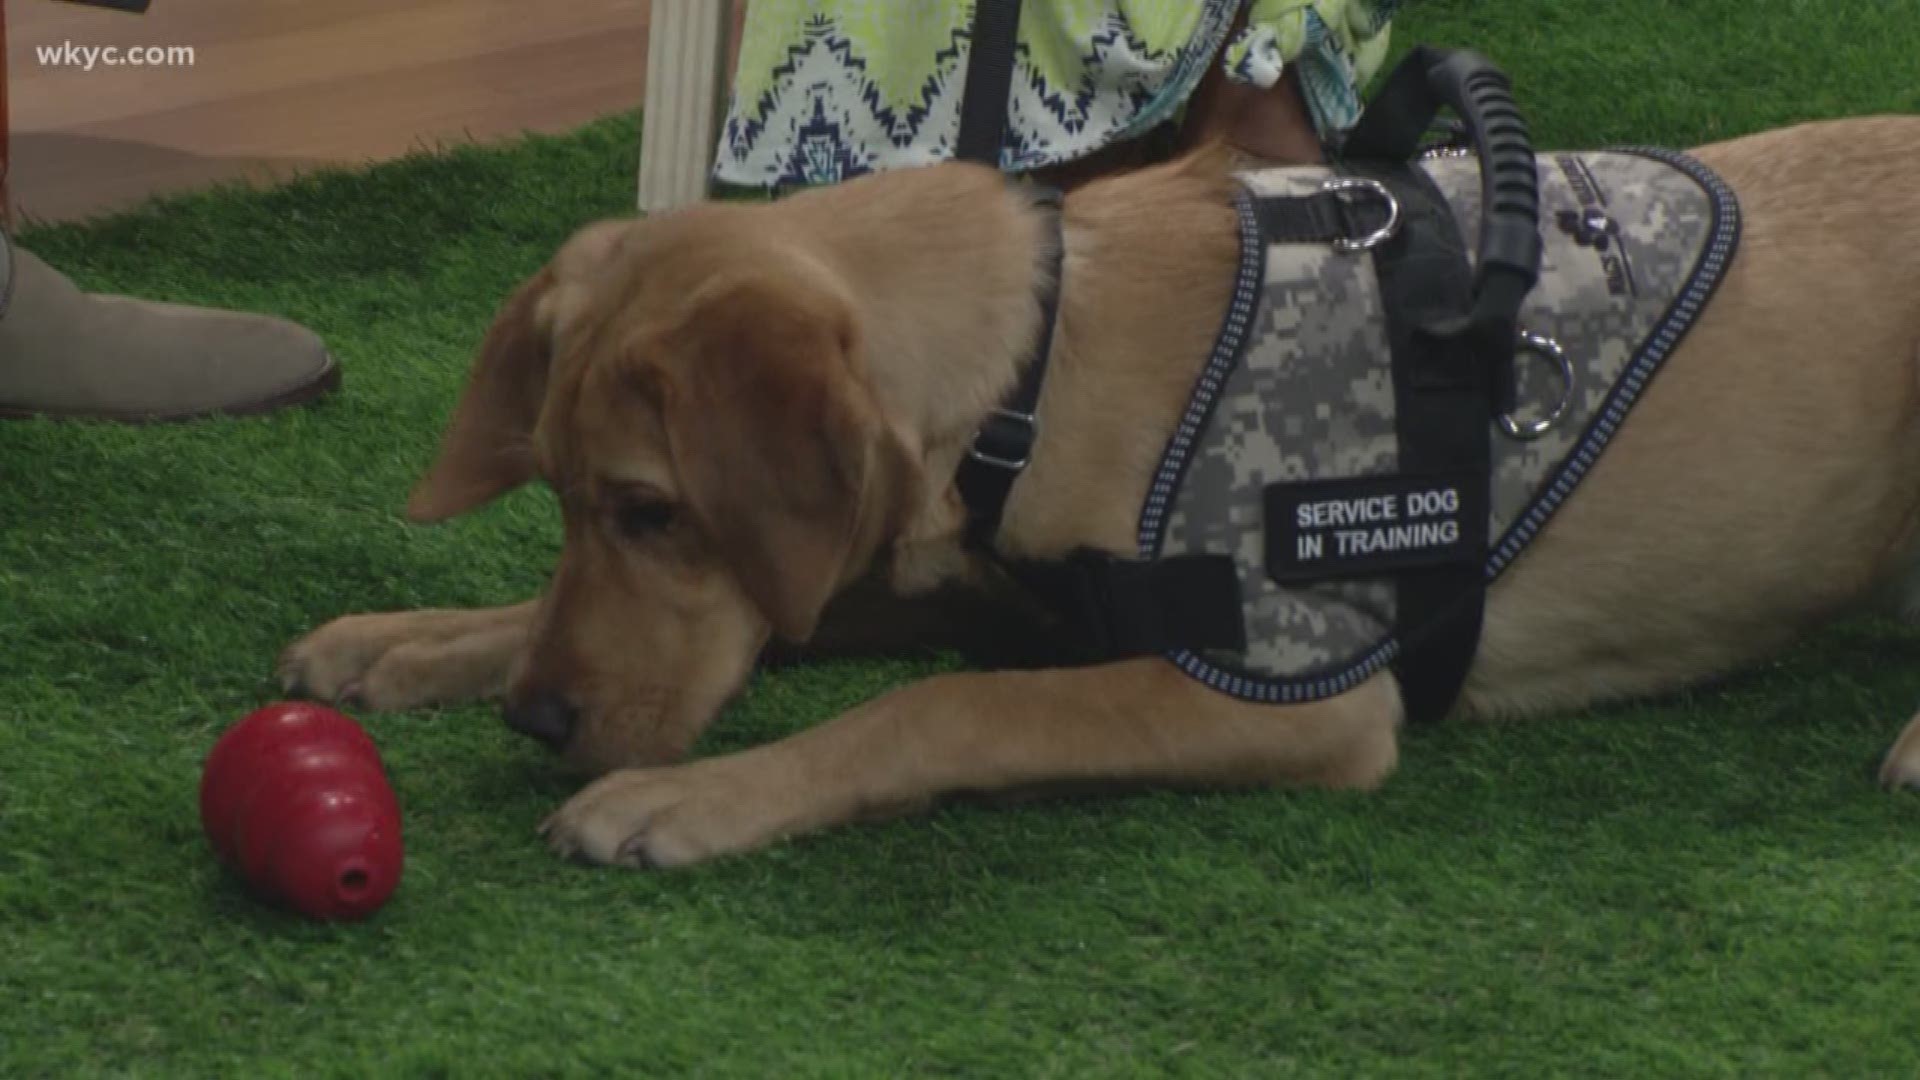 June 27, 2019: Roxy's service dog vest is a very important part of her life as a Wags 4 Warriors pup. Here's the progress Roxy has made these last few weeks.